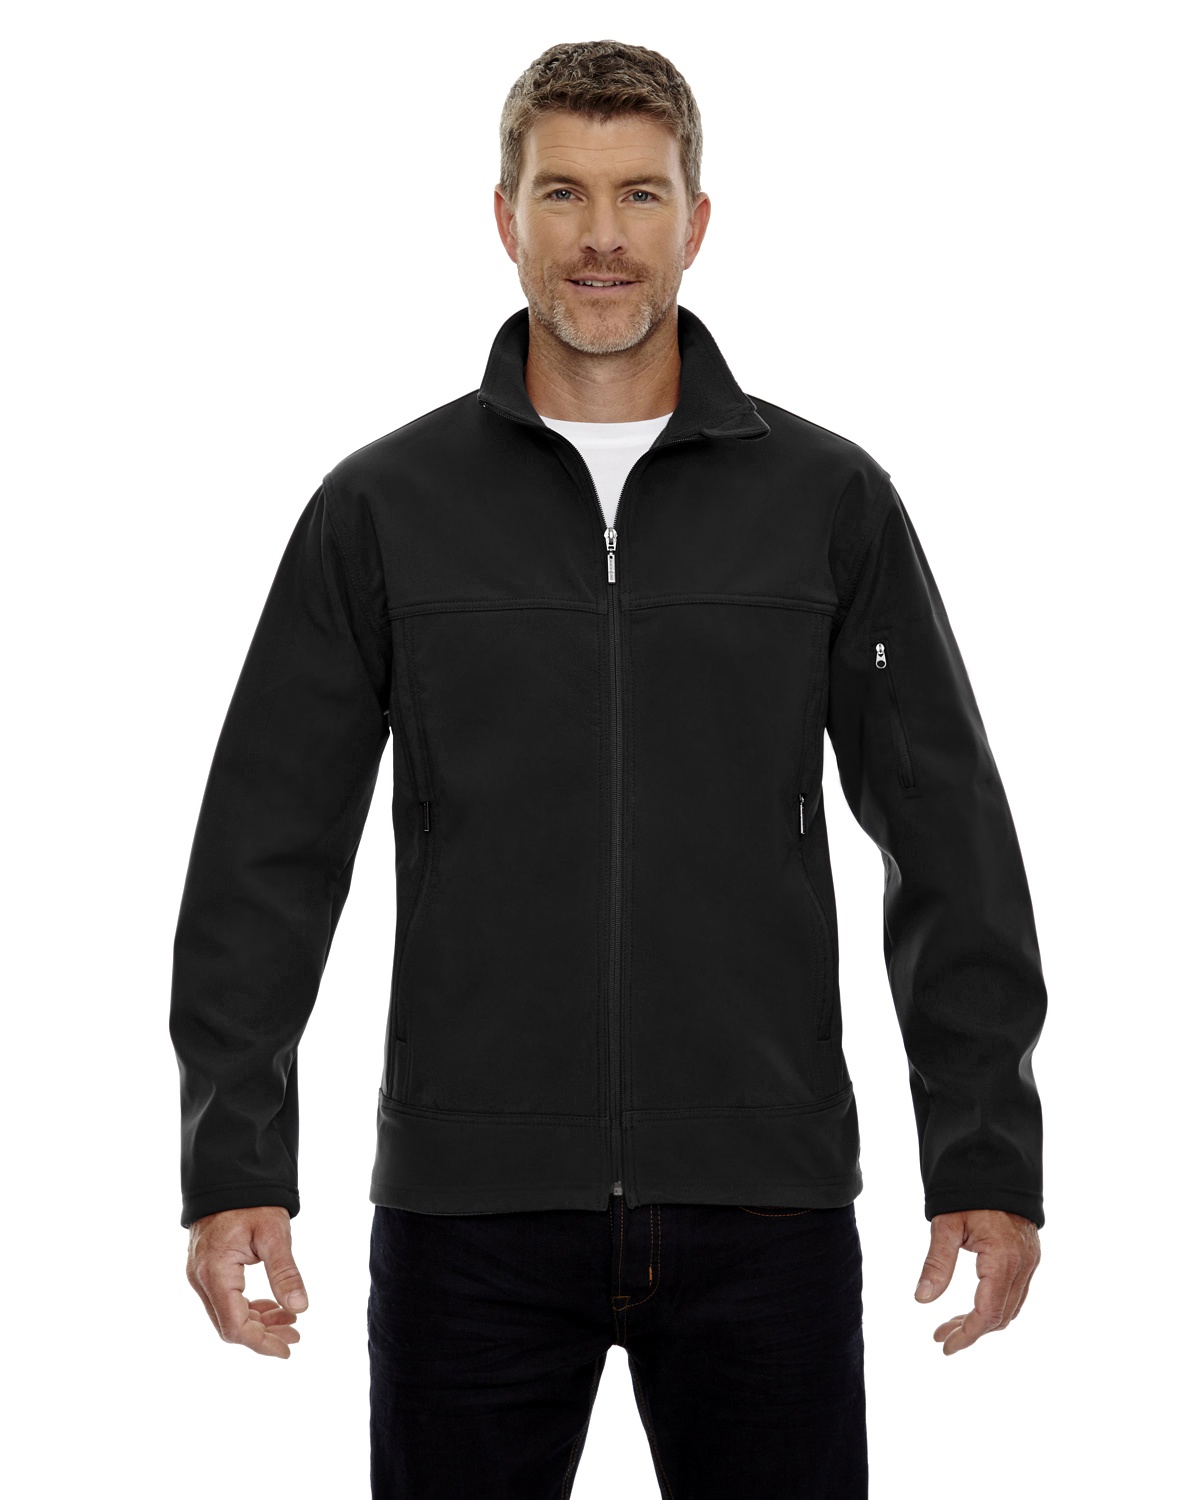 Men's Cruise Two-Layer Fleece Bonded Soft Shell Jacket